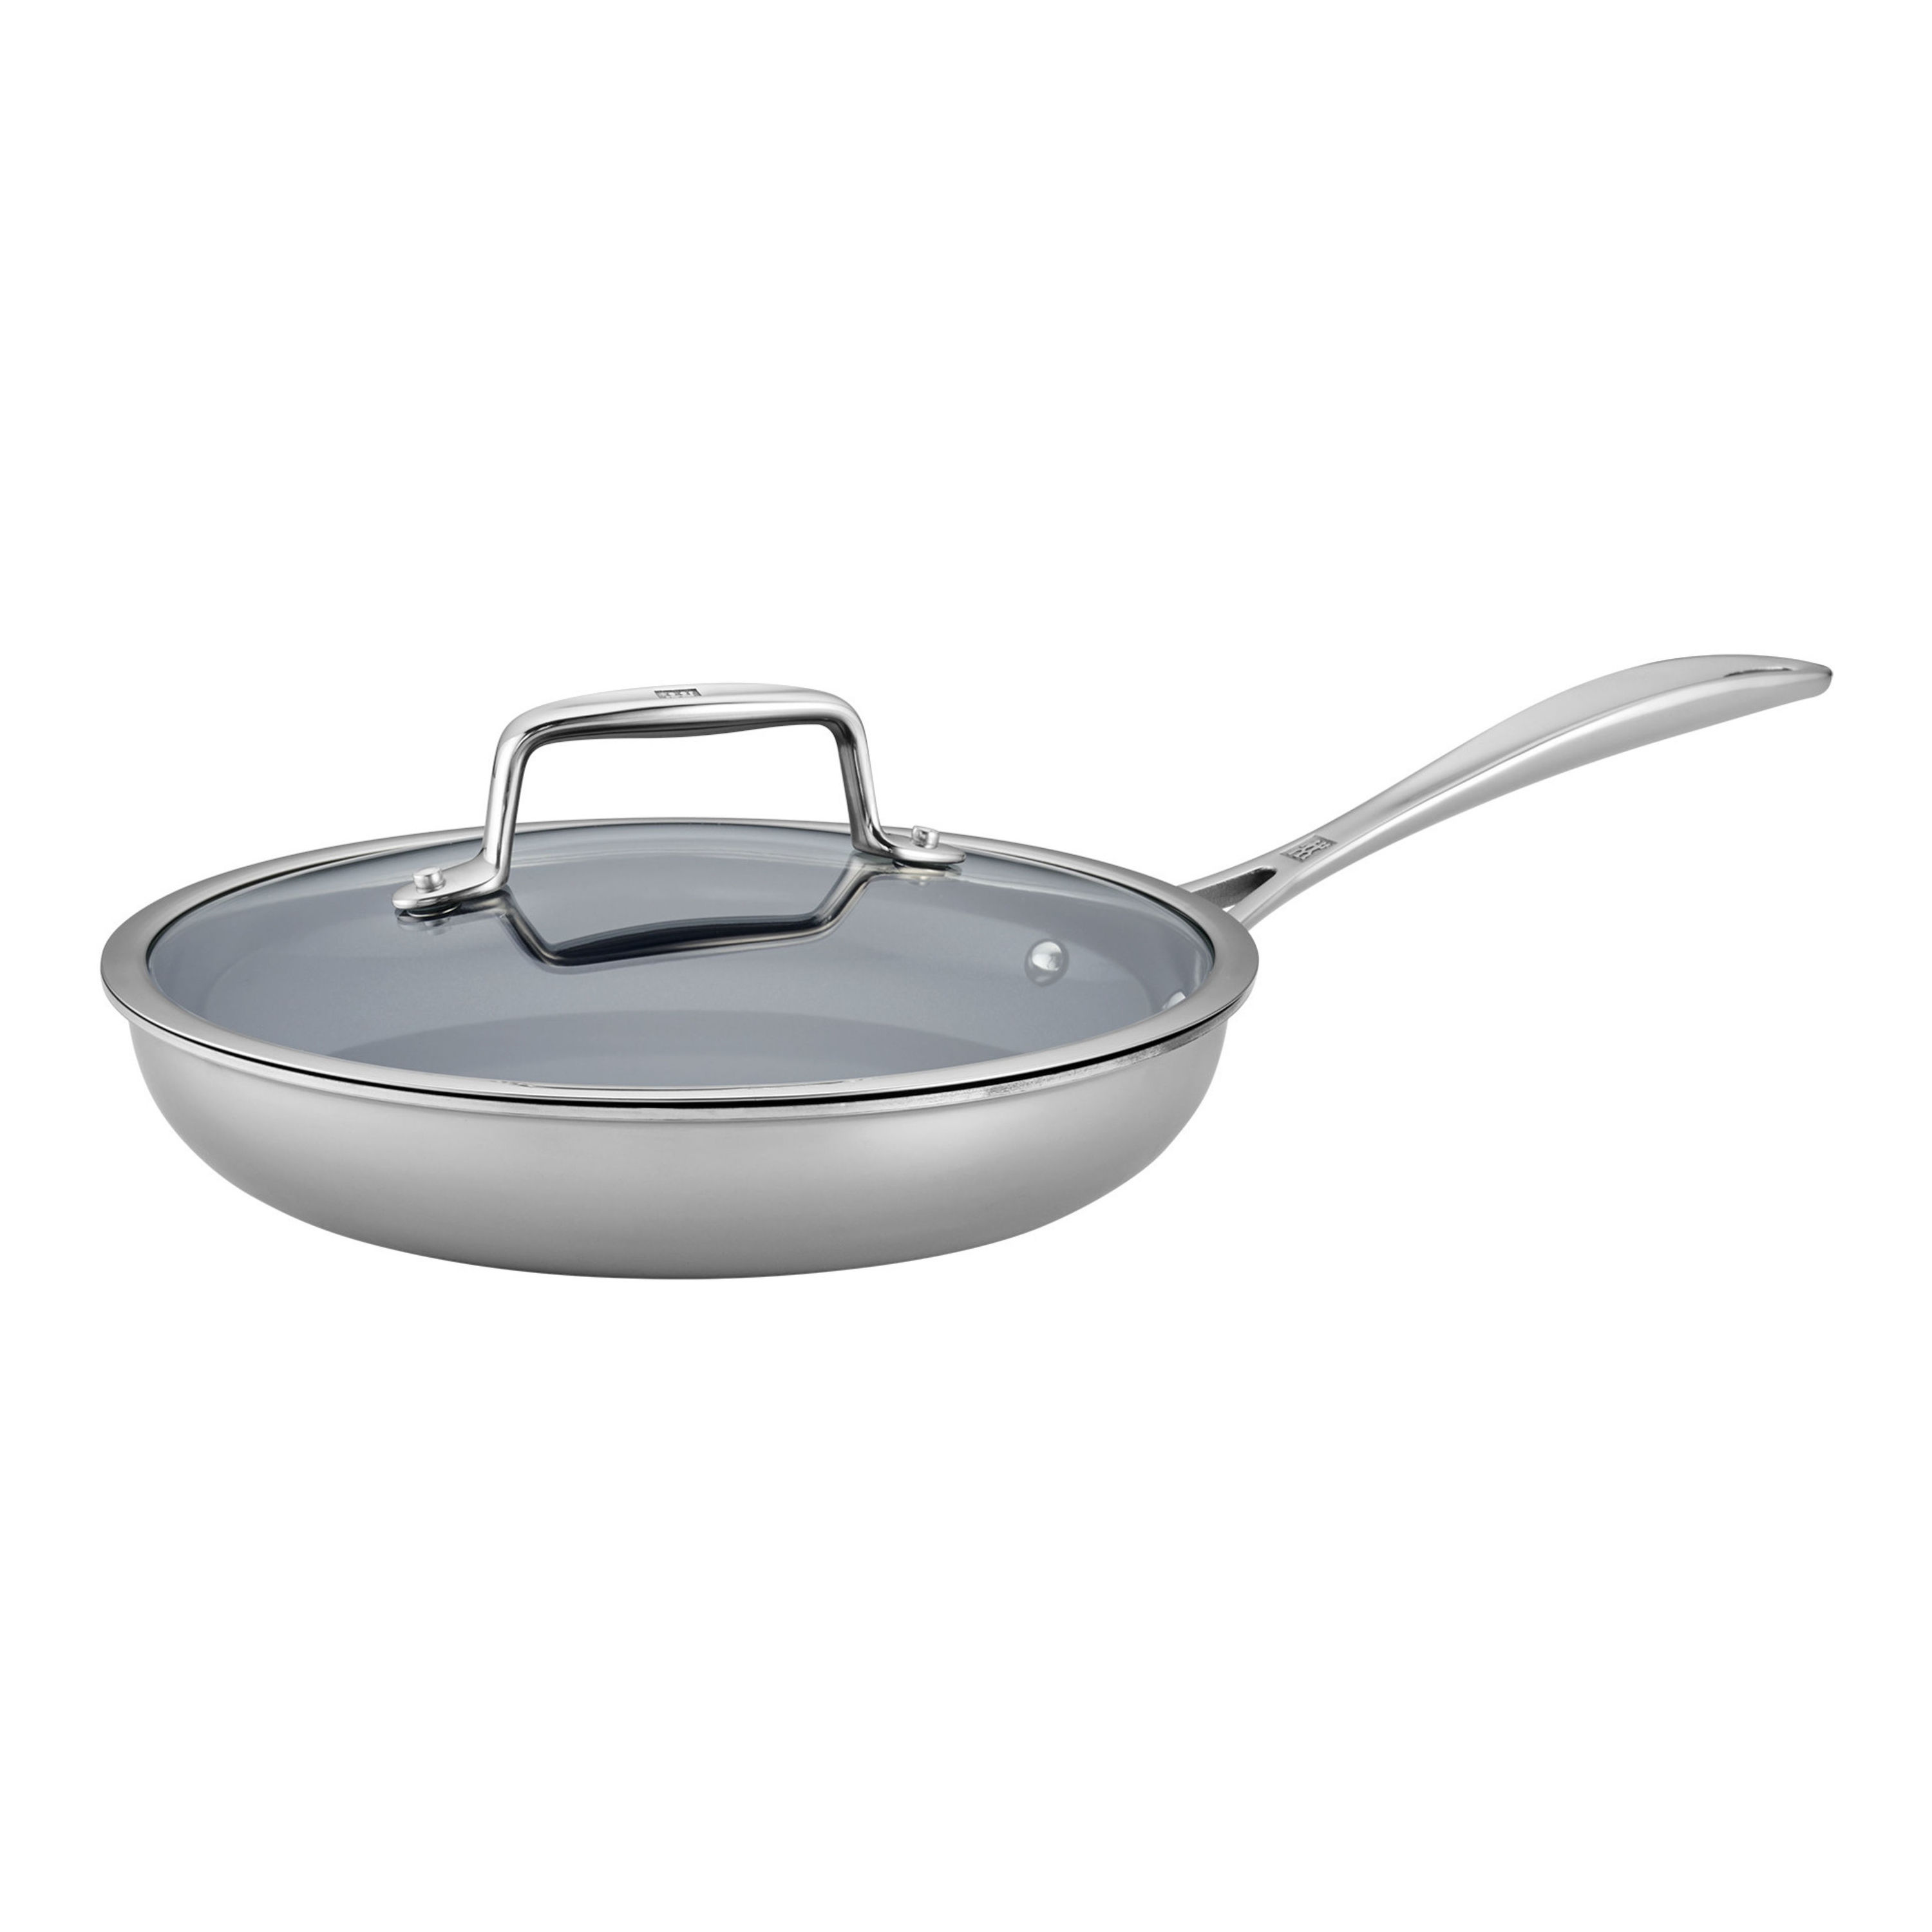 Zwilling Clad CFX 2-pc, Stainless Steel, Ceramic, Non-Stick, Fry Pan with Lid Set